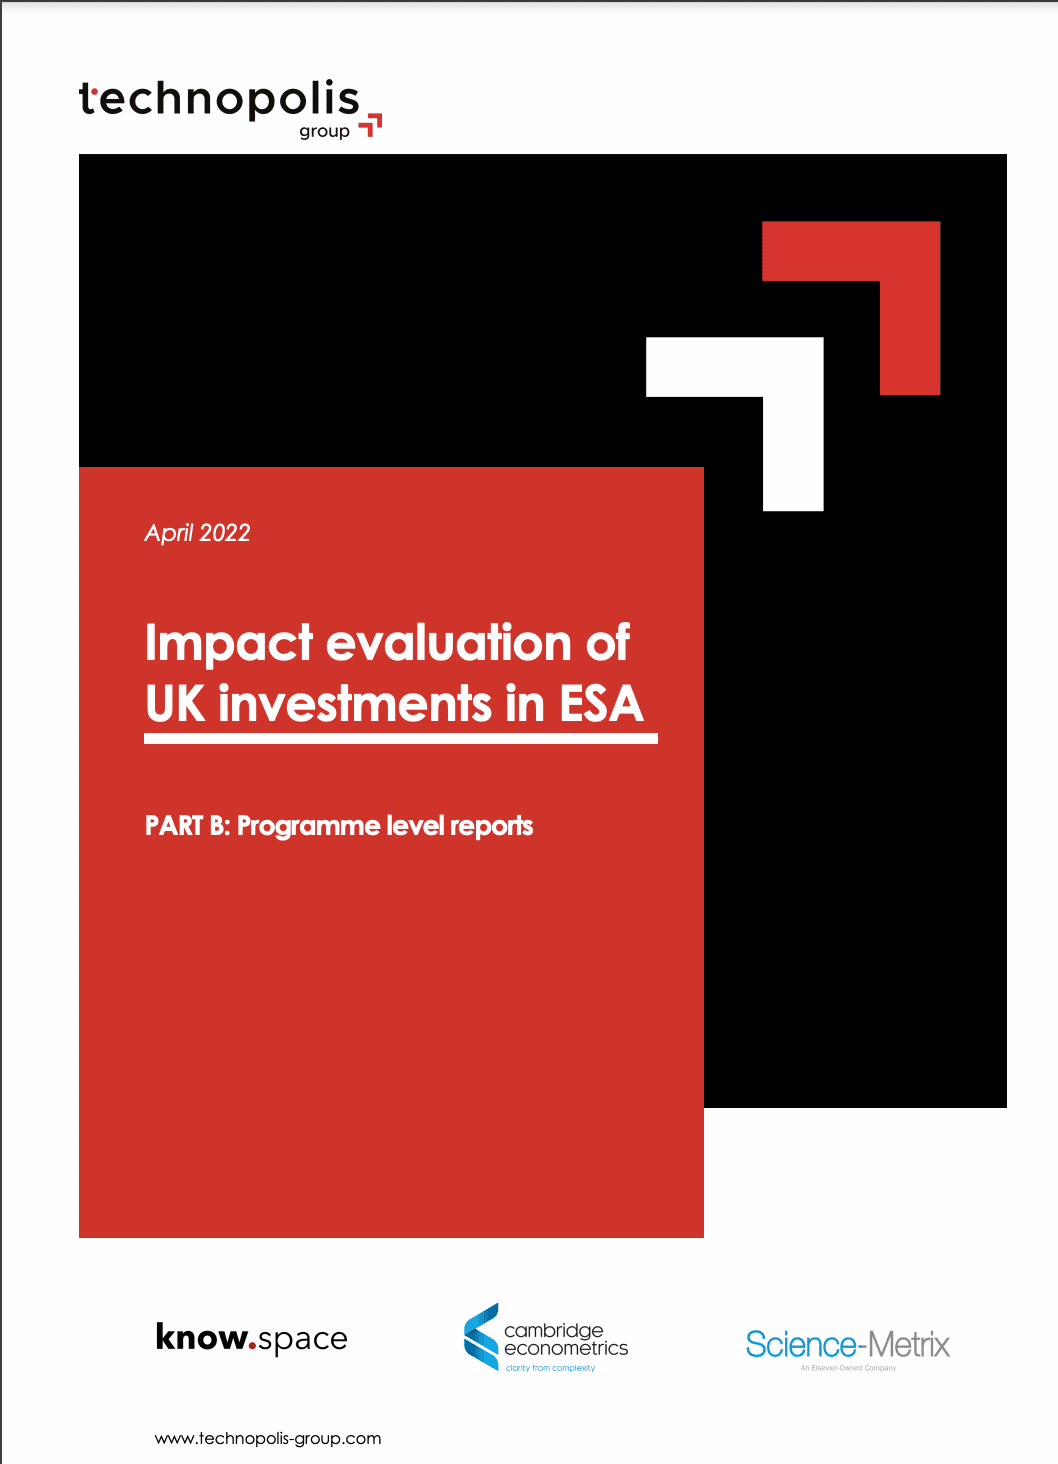 Impact evaluation of UK investment in ESA – PART B: Programme level reports